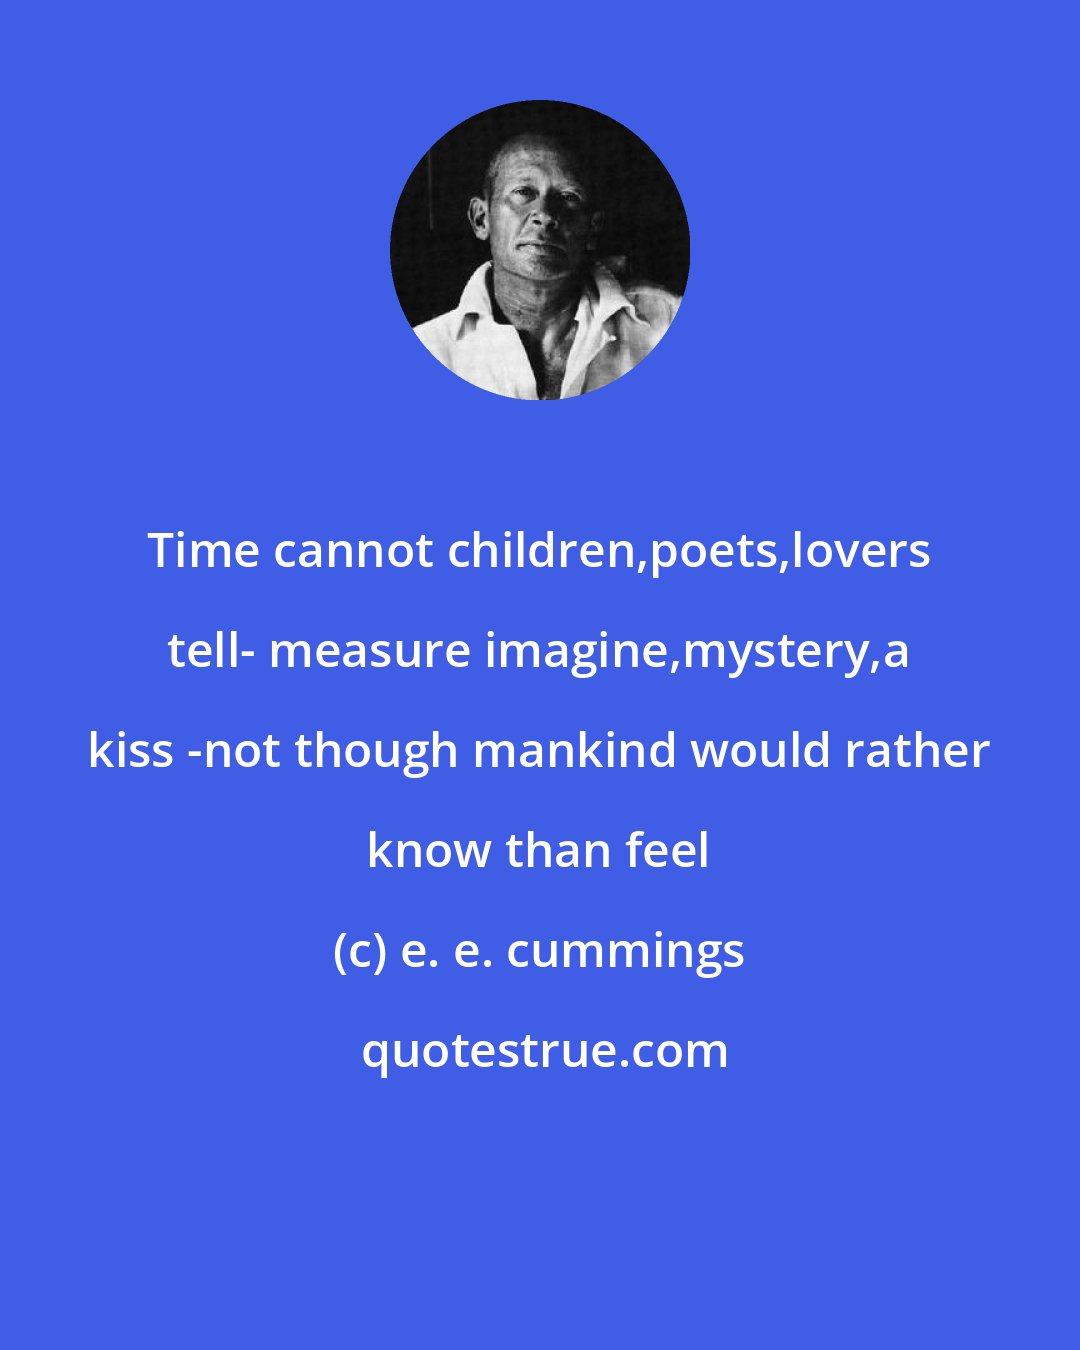 e. e. cummings: Time cannot children,poets,lovers tell- measure imagine,mystery,a kiss -not though mankind would rather know than feel